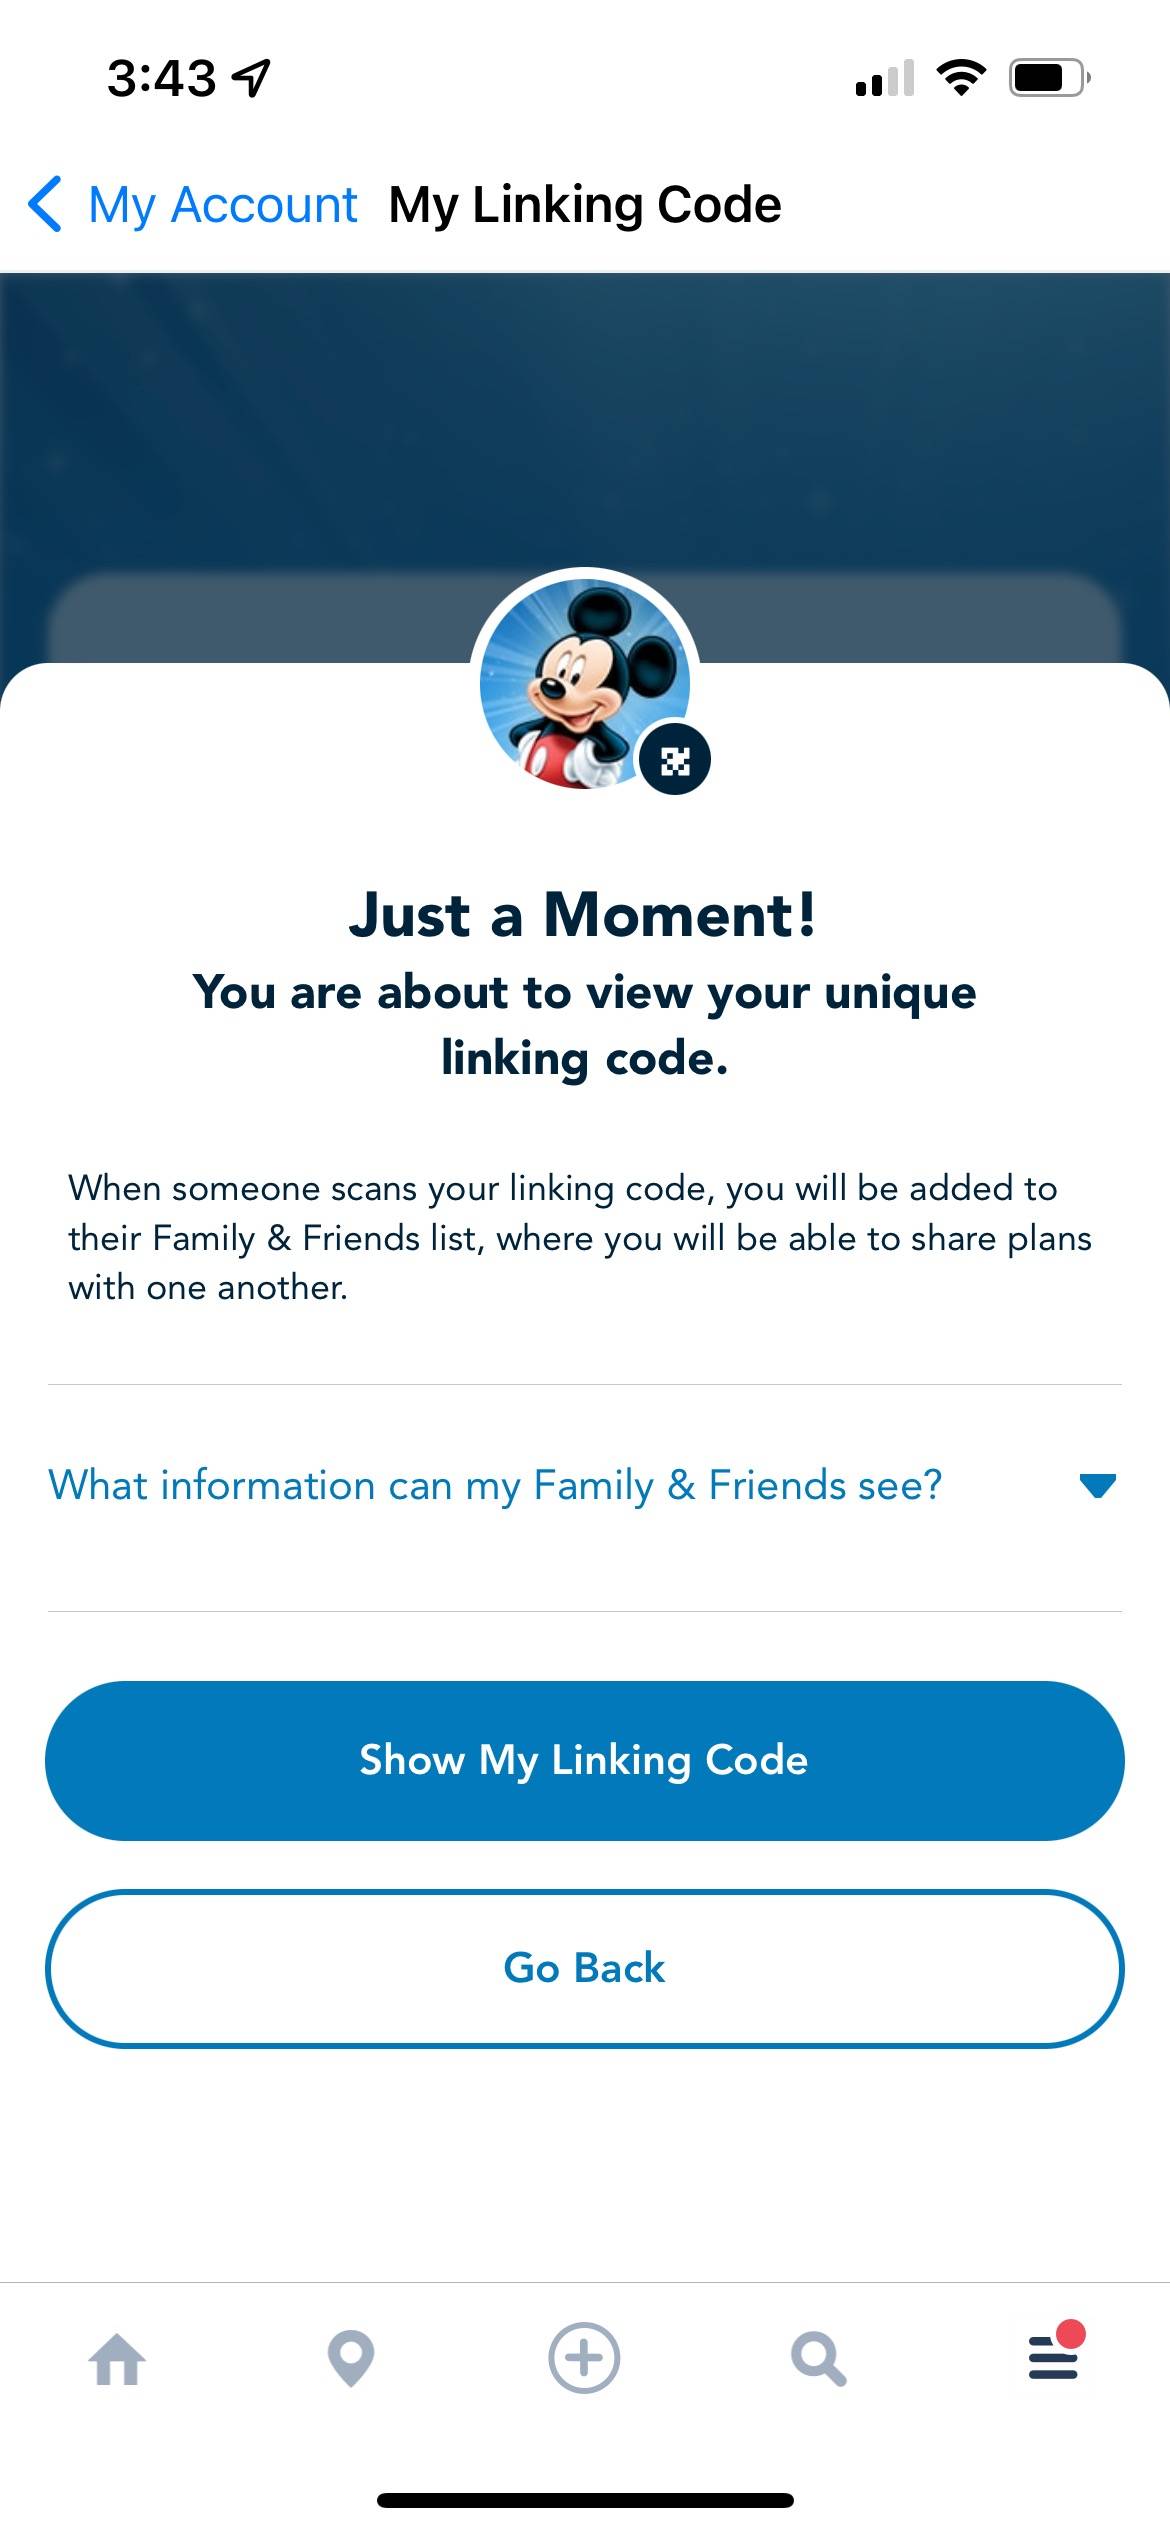 Screenshot - My Disney Experience Friends and Family linking with QR code